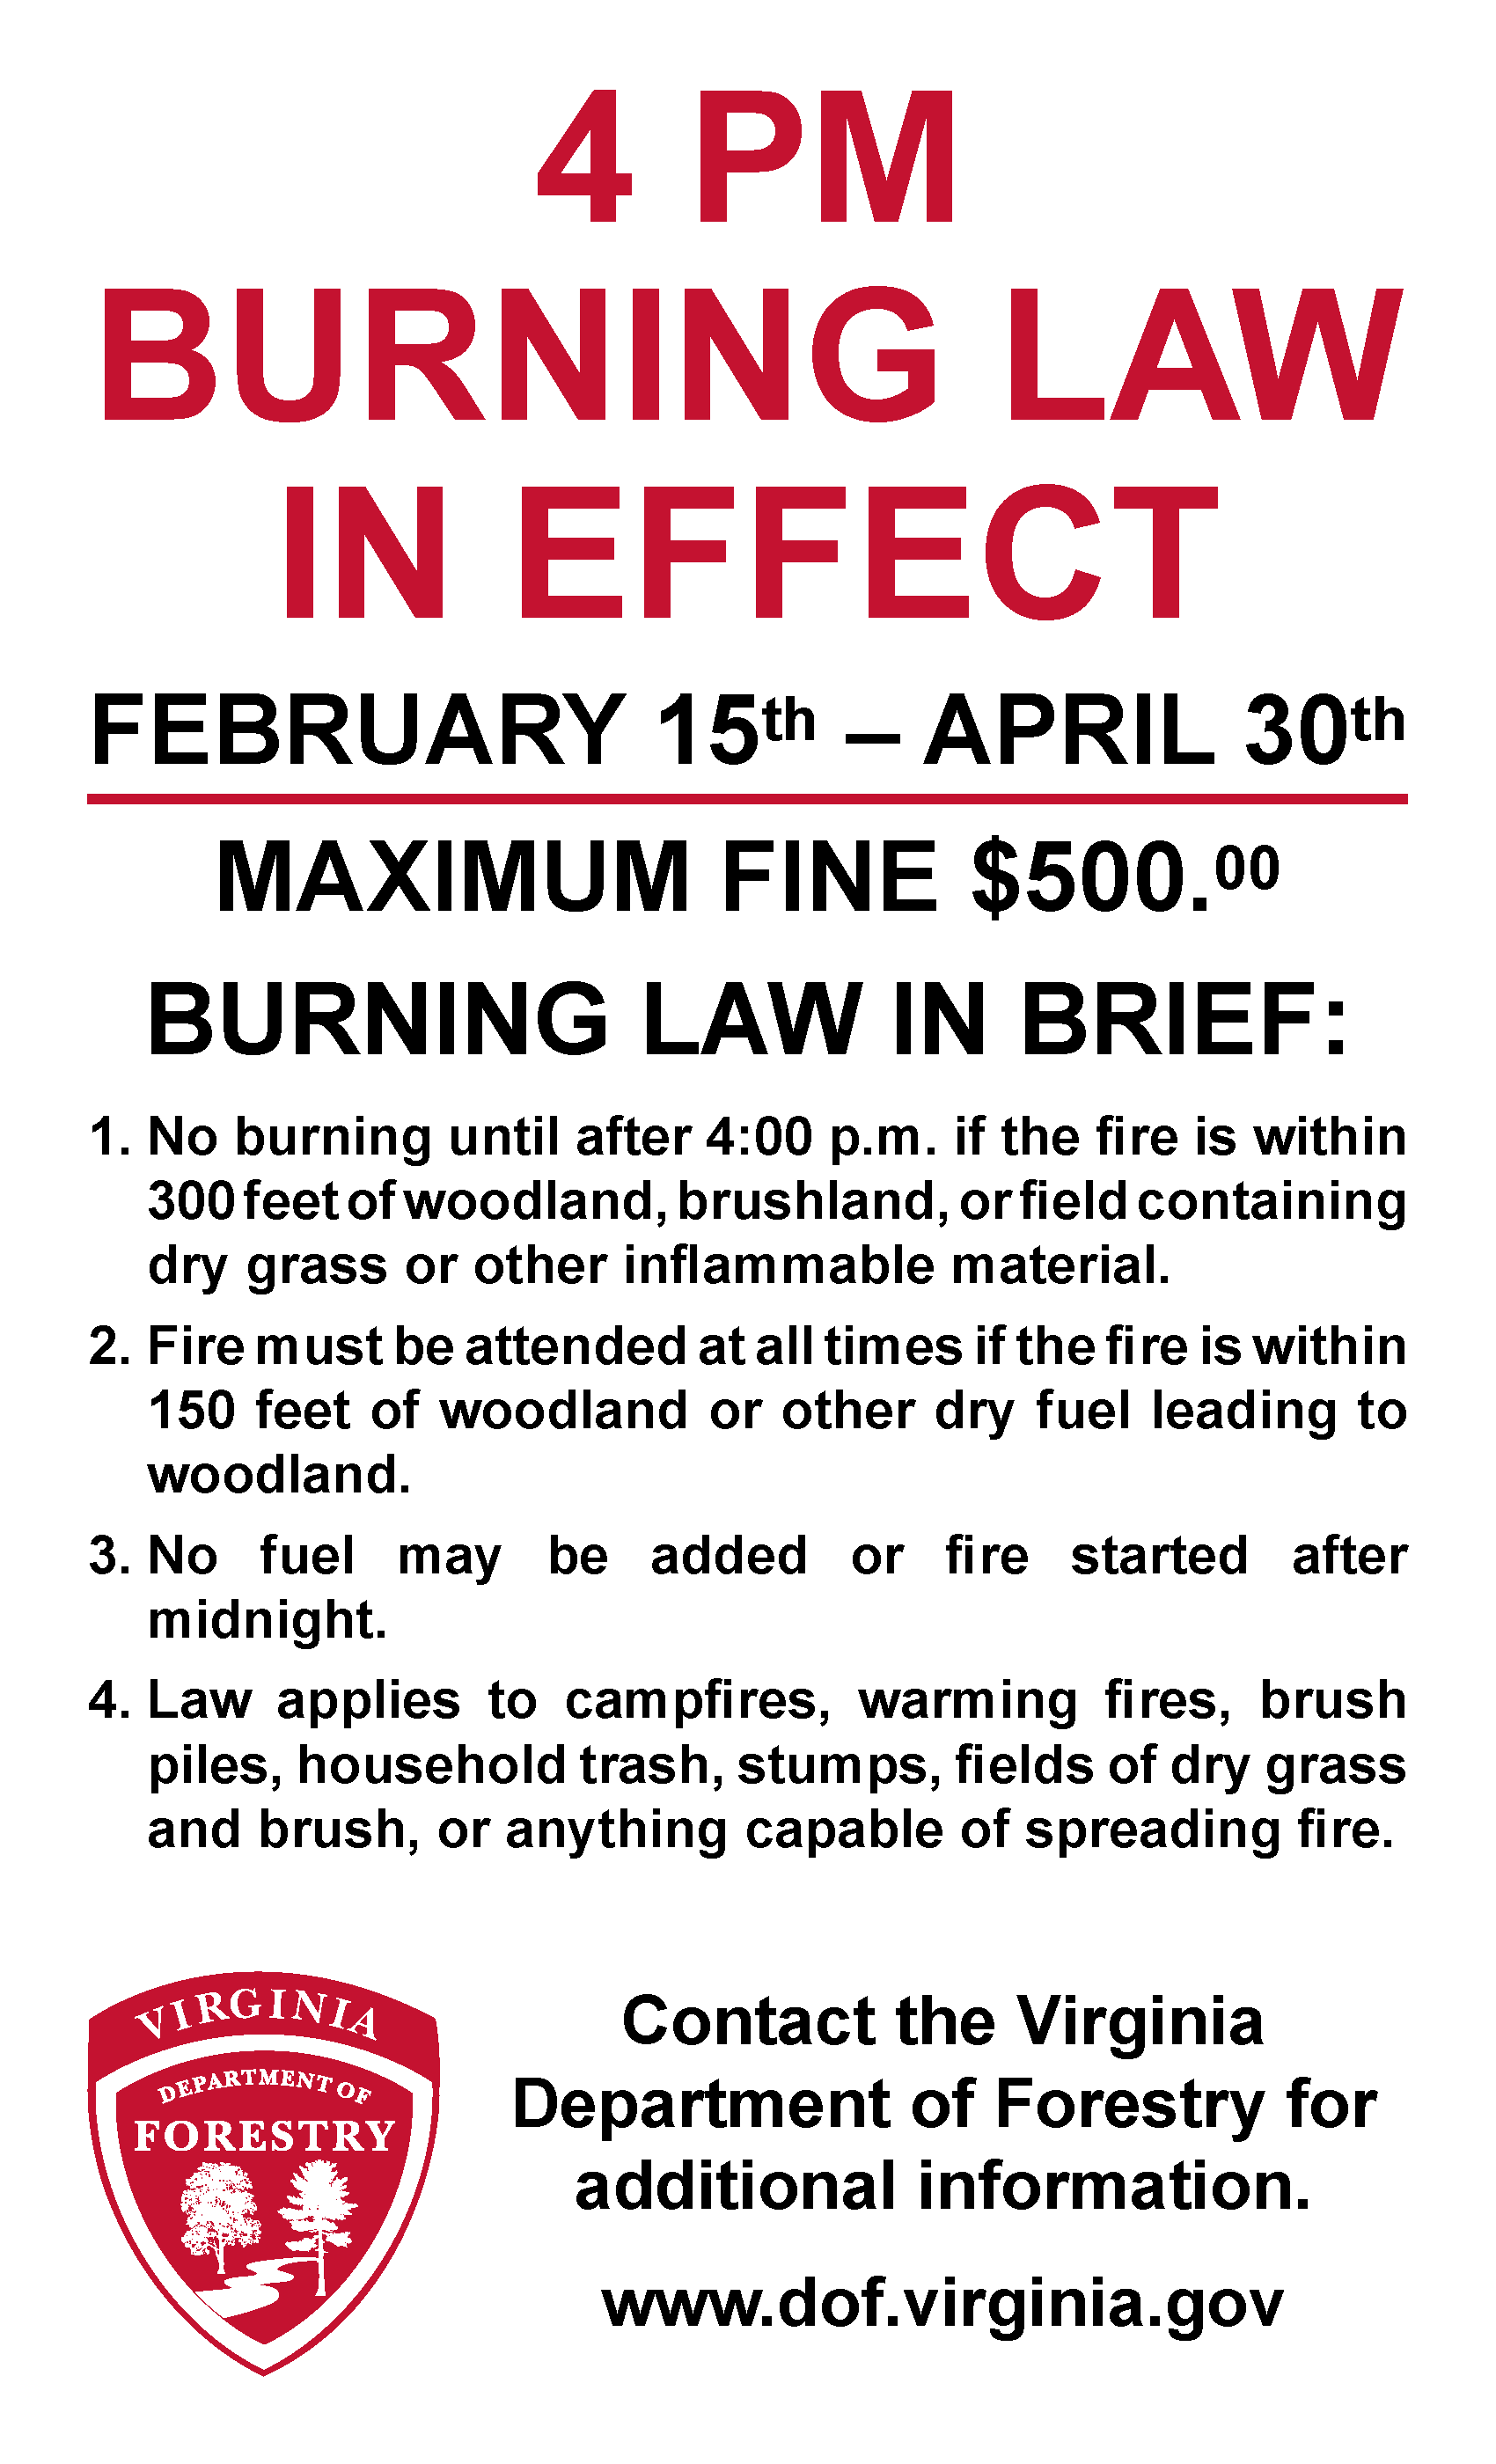 4PM-Burning-Law-in-Brief-Sign (1)